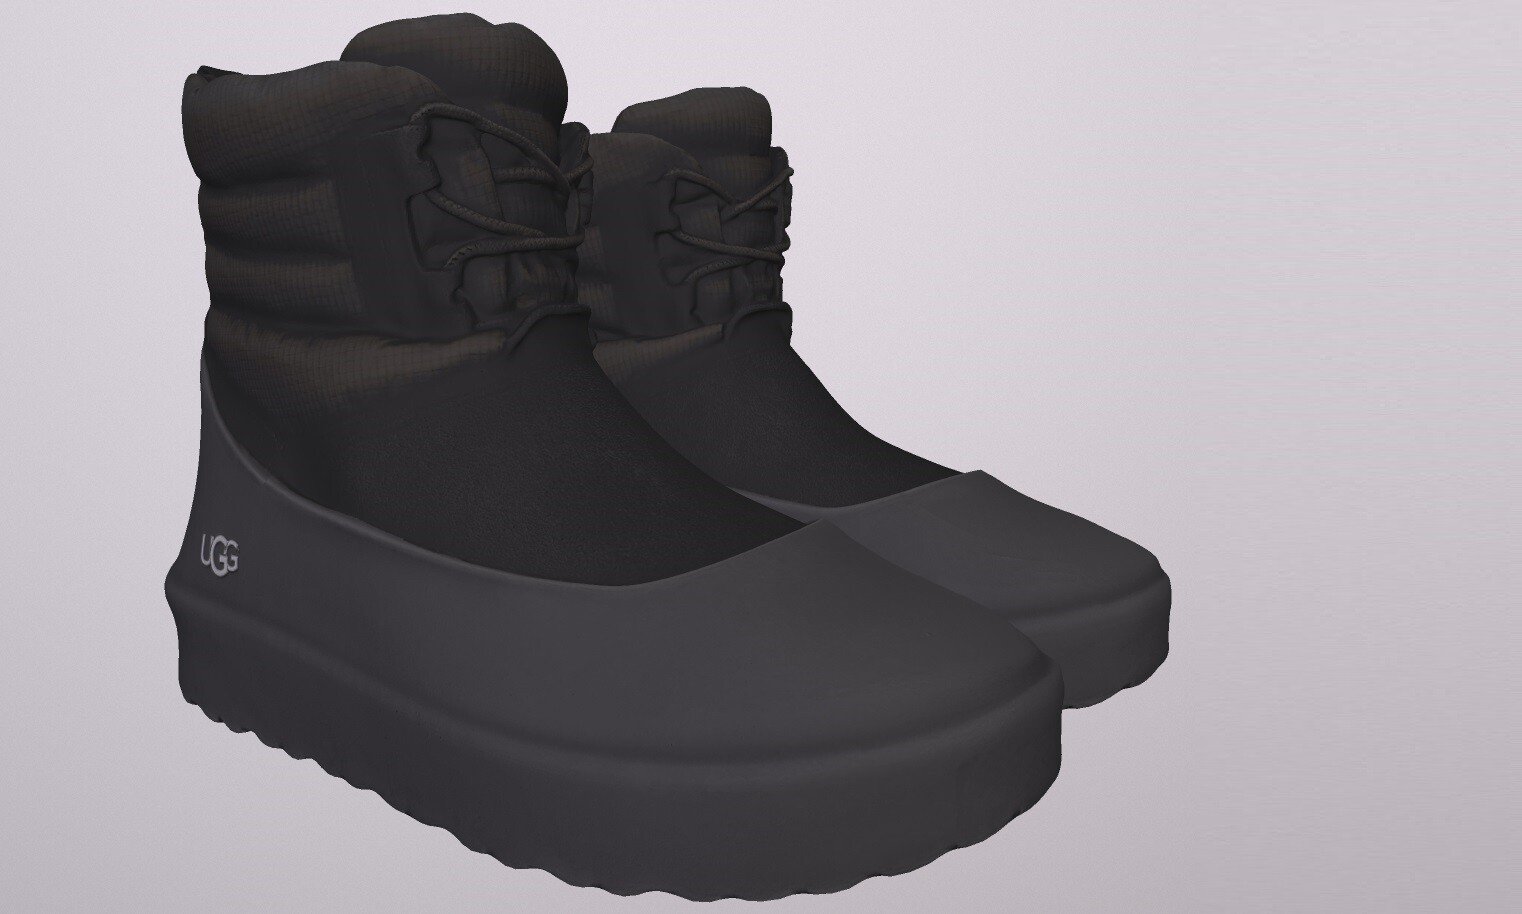 ArtStation - UGG CLASSIC MINI SHOES low-poly PBR | Game Assets